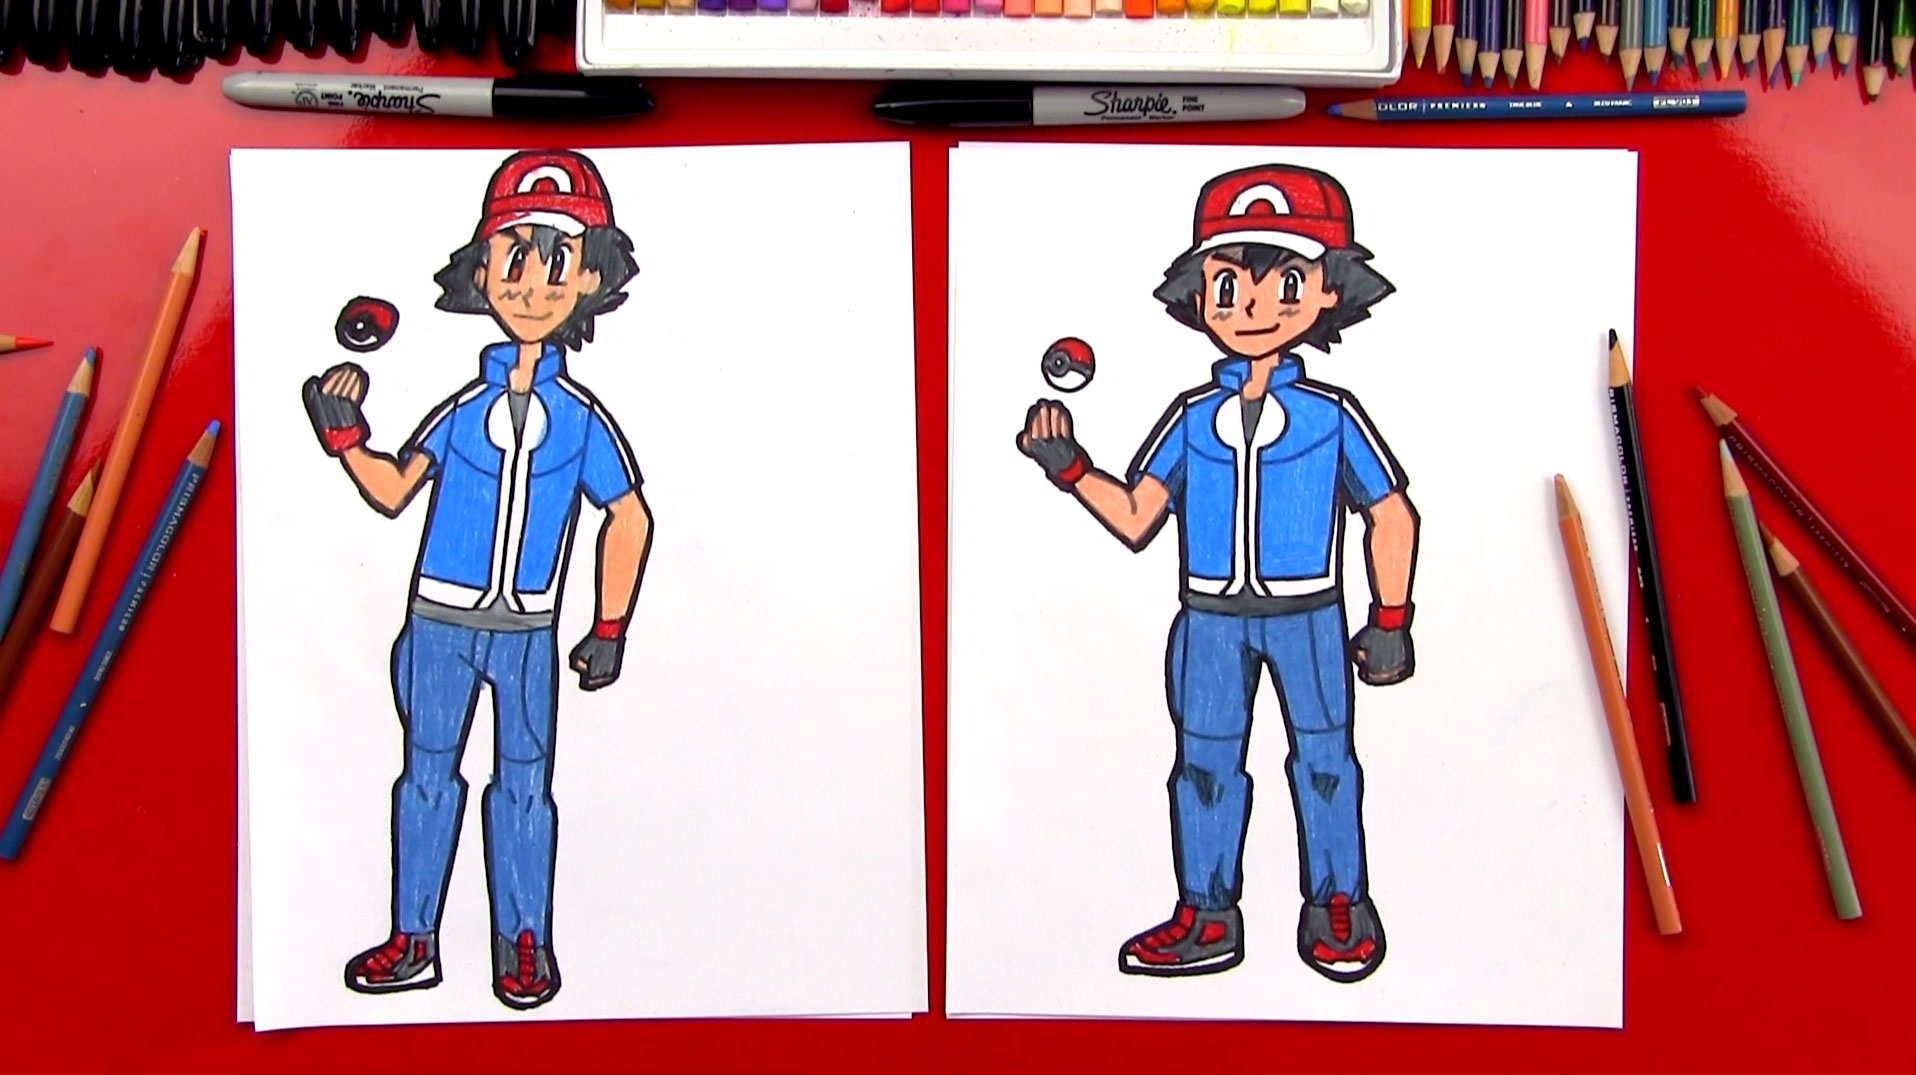 How To Draw Ash Ketchum From Pokemon - Art For Kids Hub